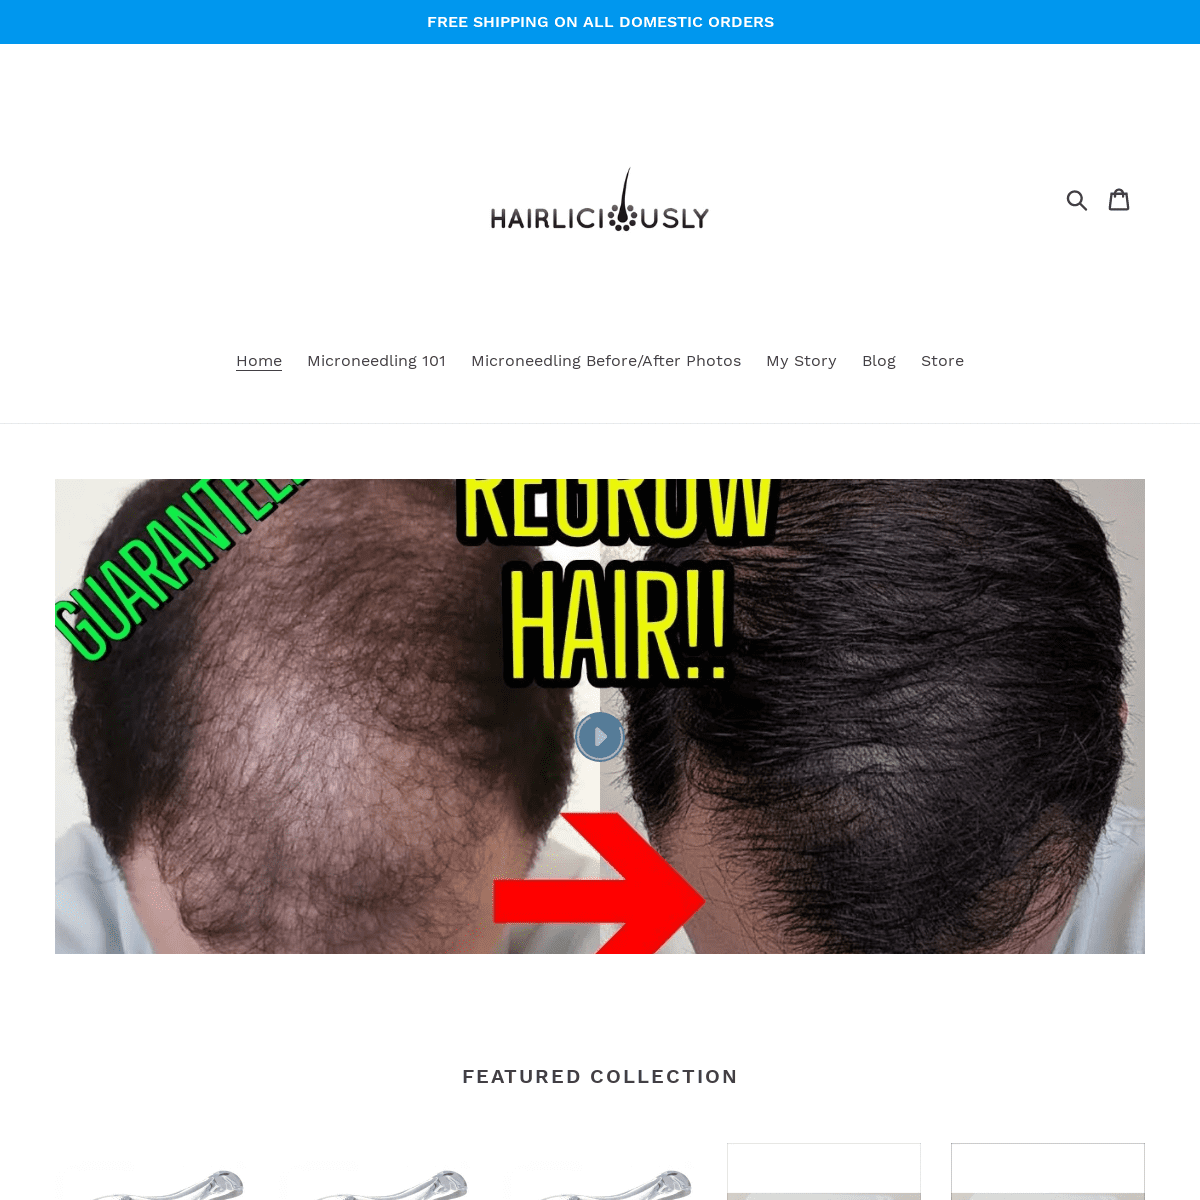 A complete backup of hairliciously.com